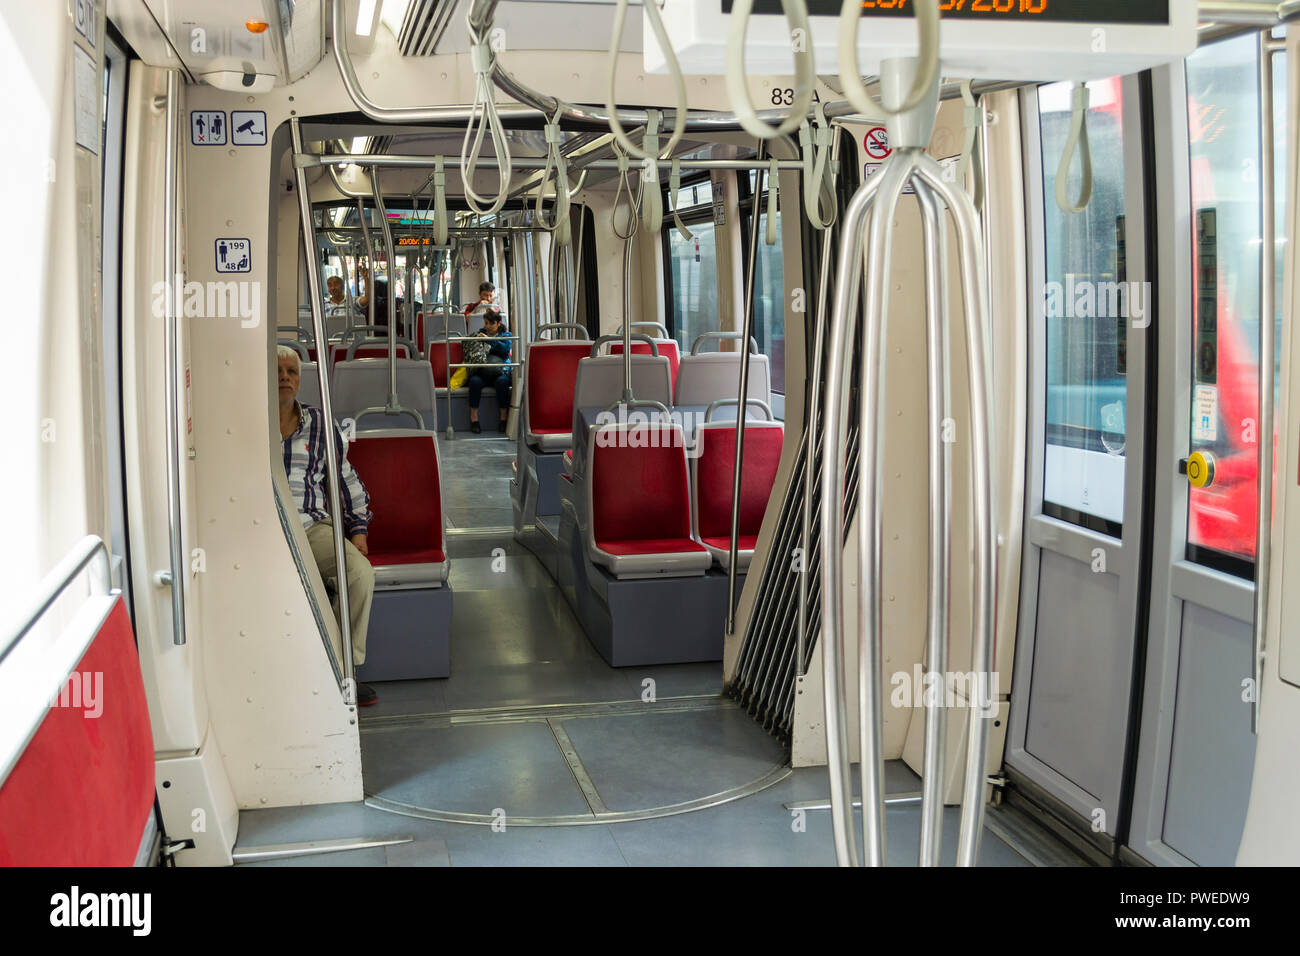 A typical interior view of a T1 tram, Istanbul, Turkey Stock Photo